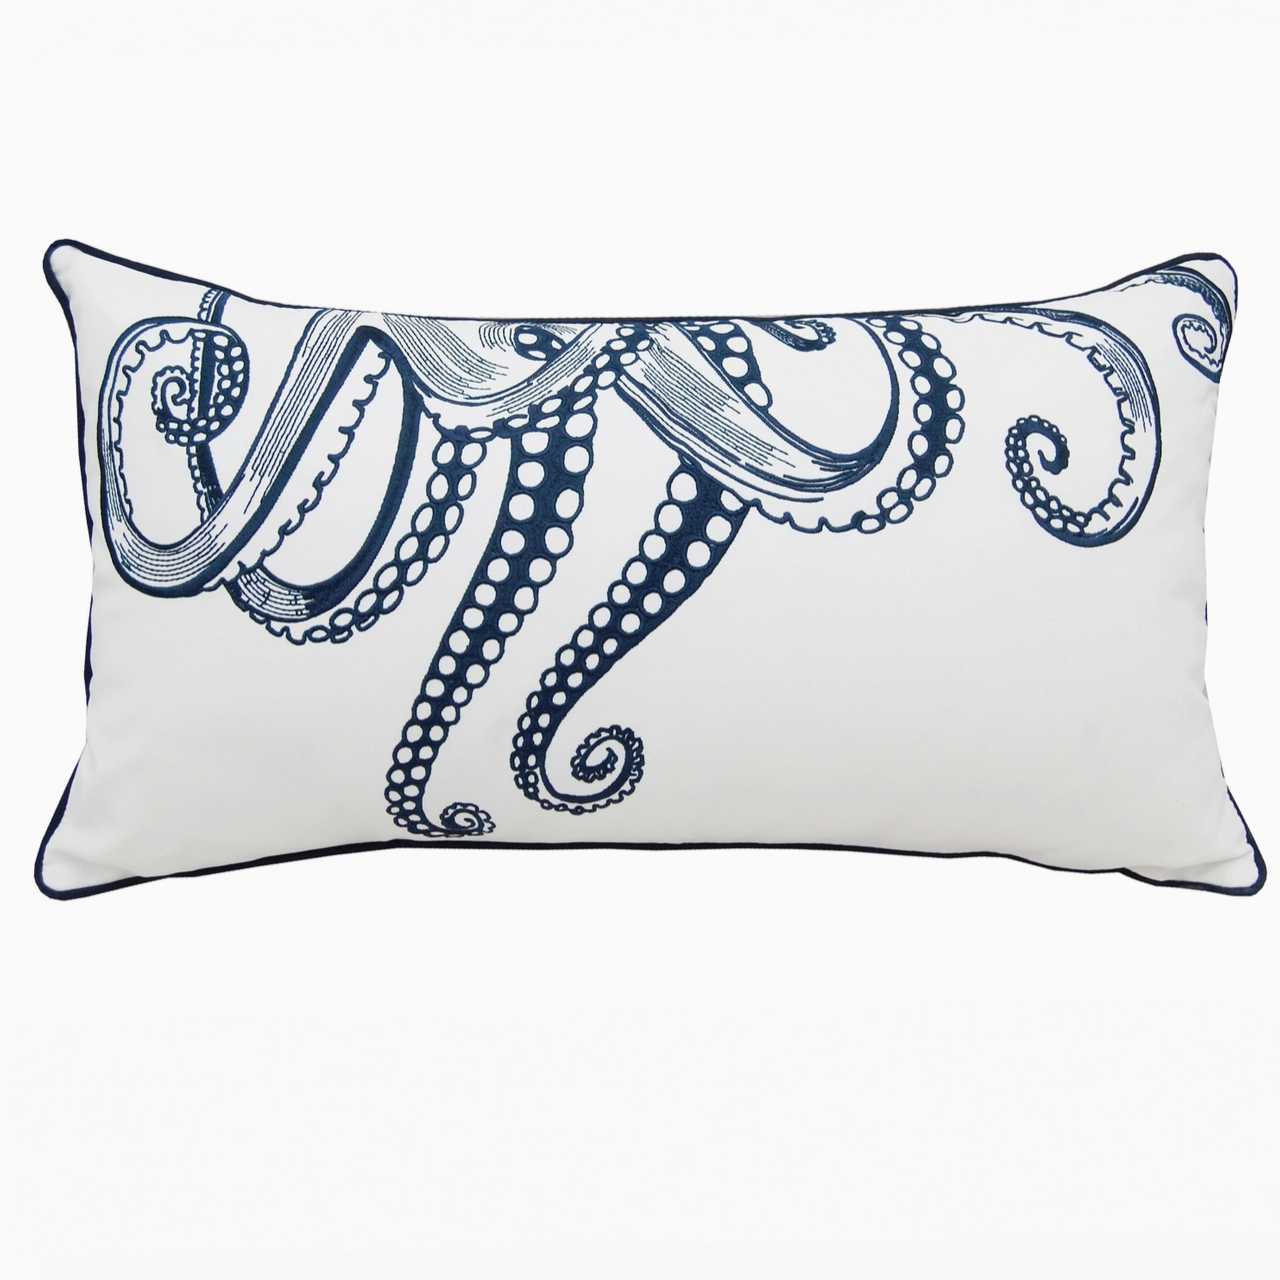 Embroidered Octopus Pillow